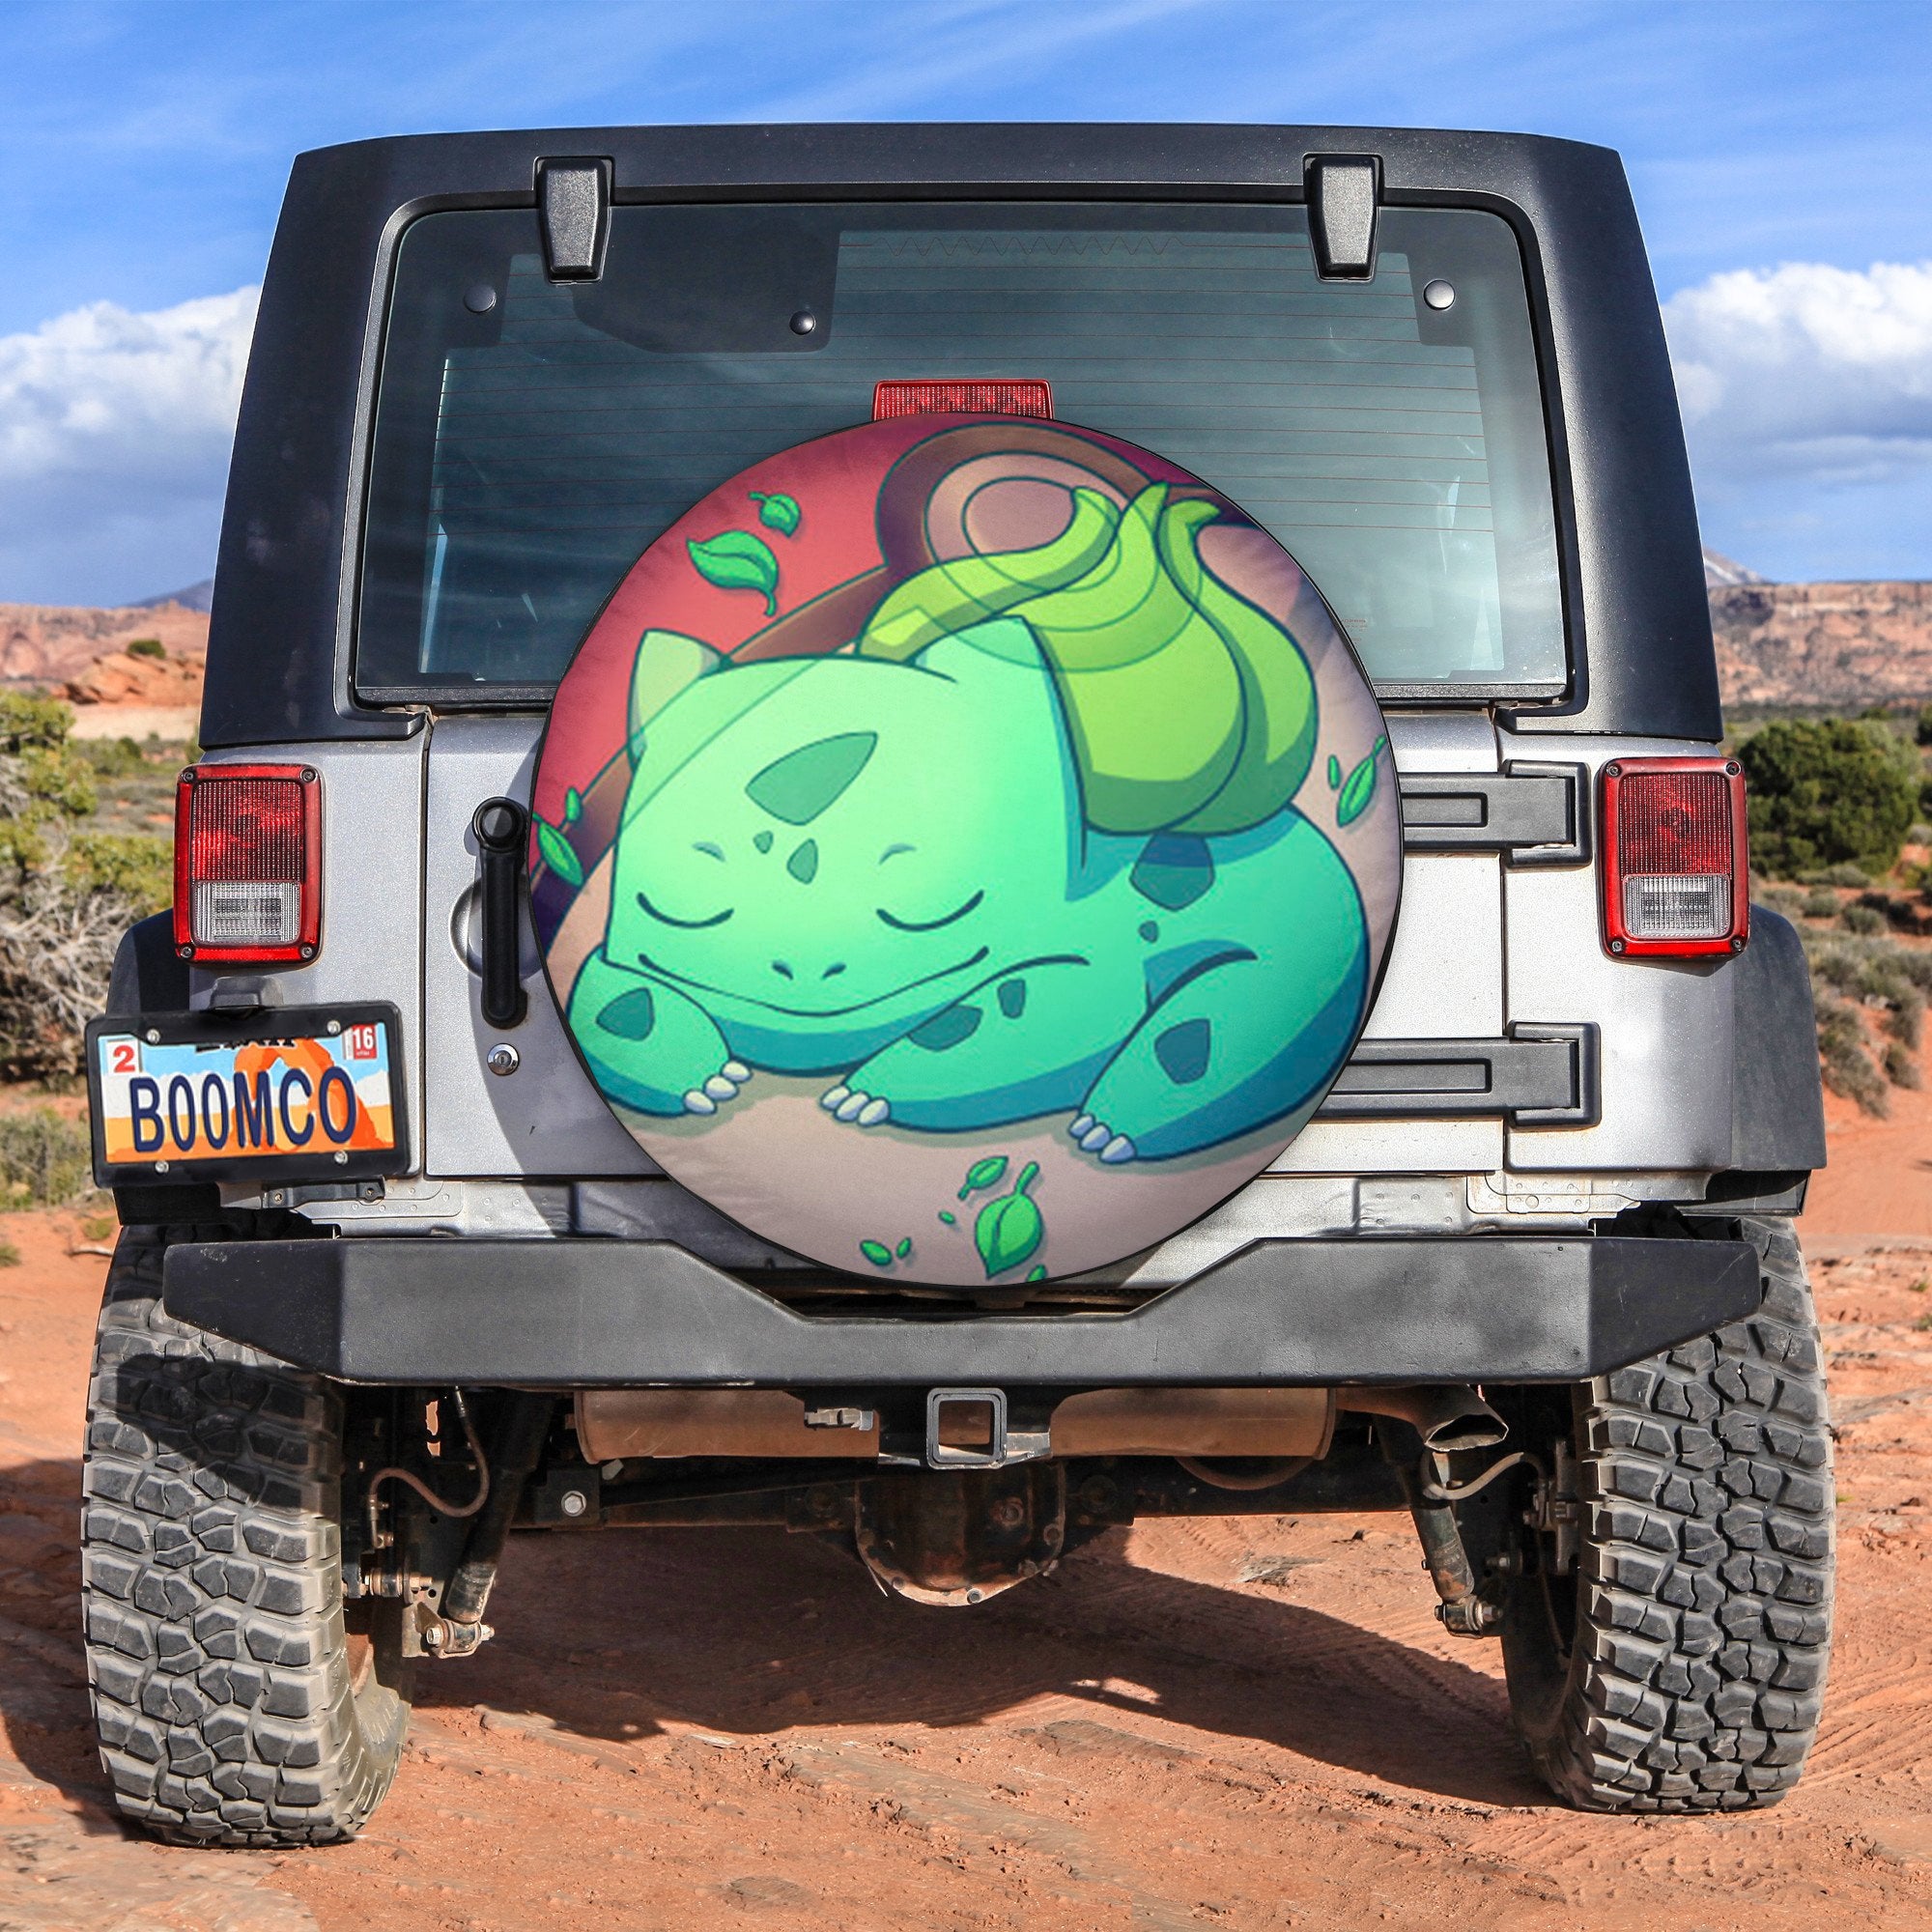 Cute Bulbasaur Kanto Pokemon Car Spare Tire Covers Gift For Campers Nearkii